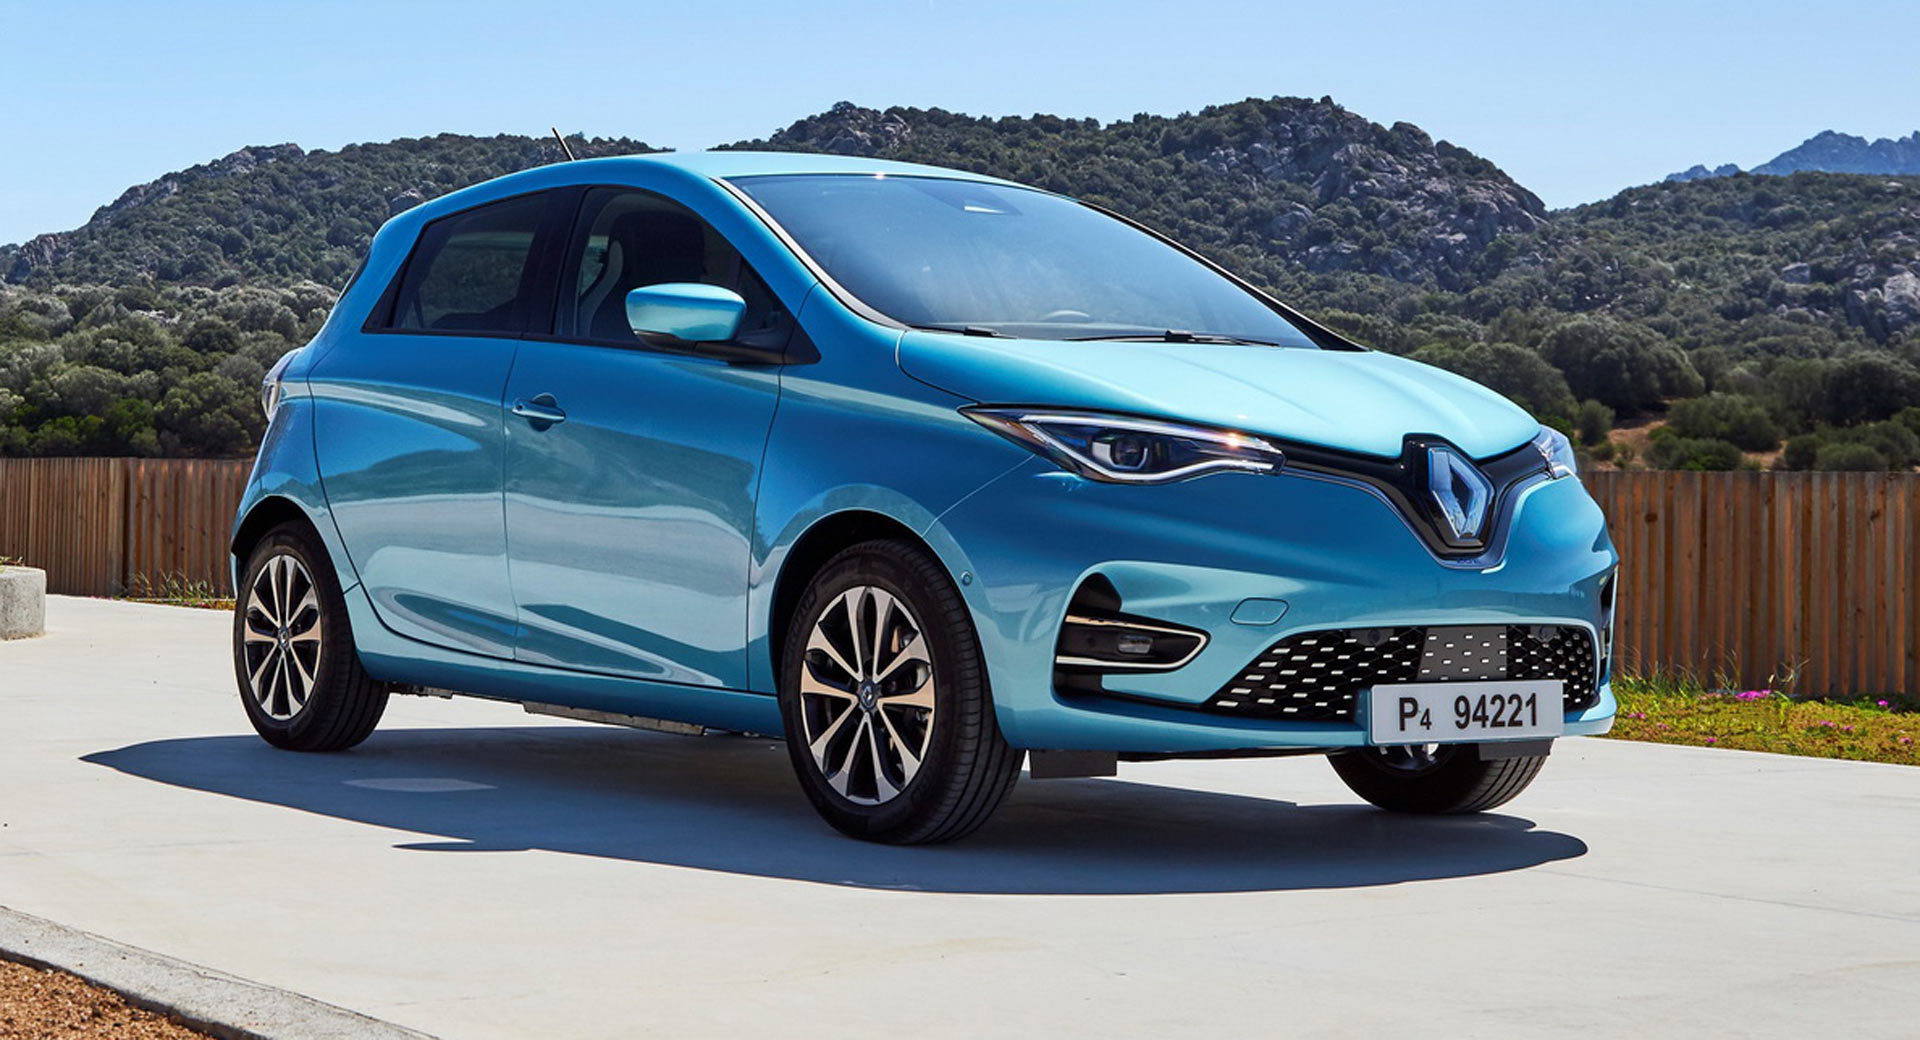 Renault Sold 62,447 Electric Vehicles In 2019 – More Than Ever Before